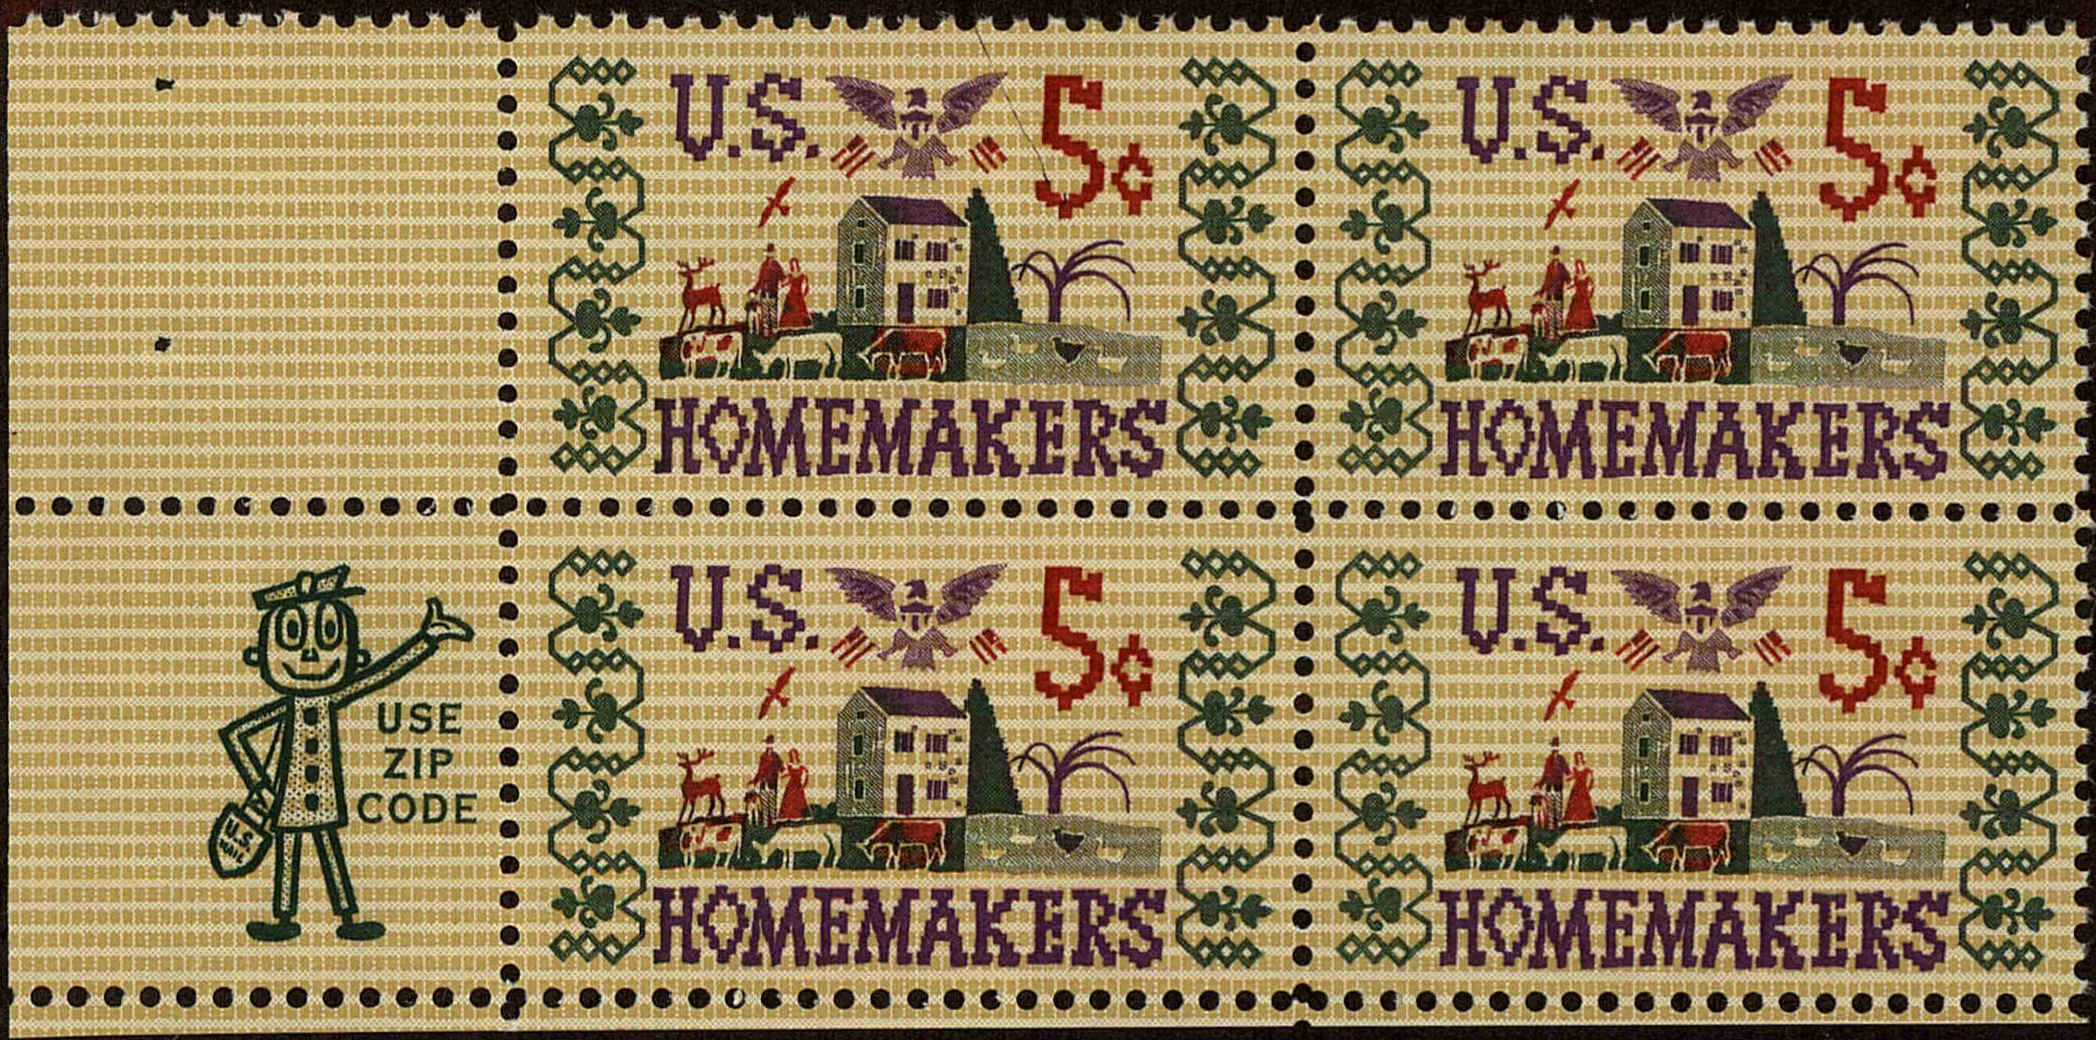 Front view of United States 1253 collectors stamp